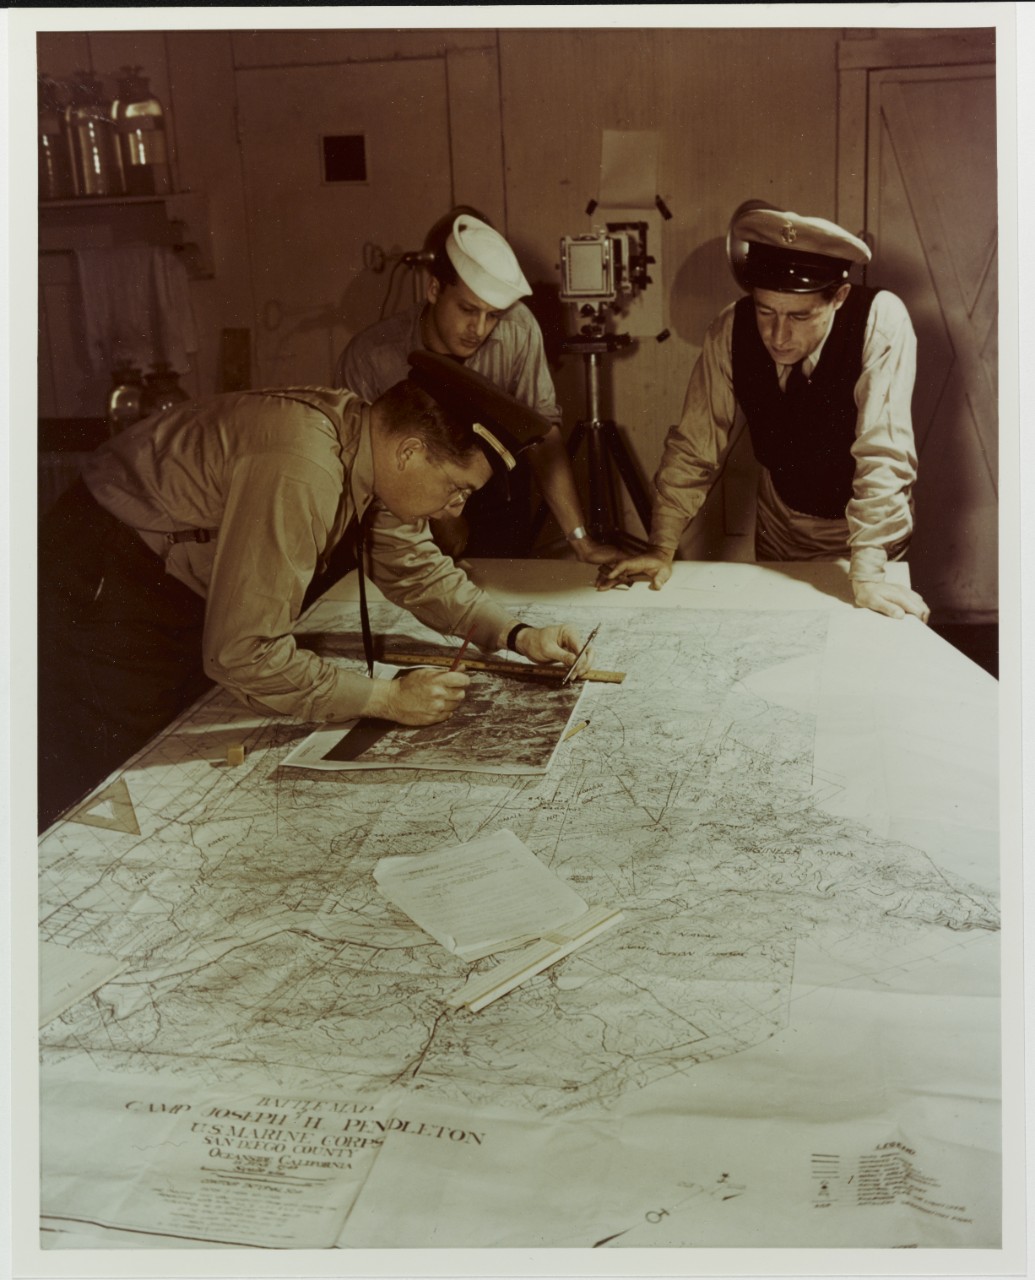 Photographic officer and assistants check details of aerial map of camp Joseph H. Pendleton, California, circa 1944-1945